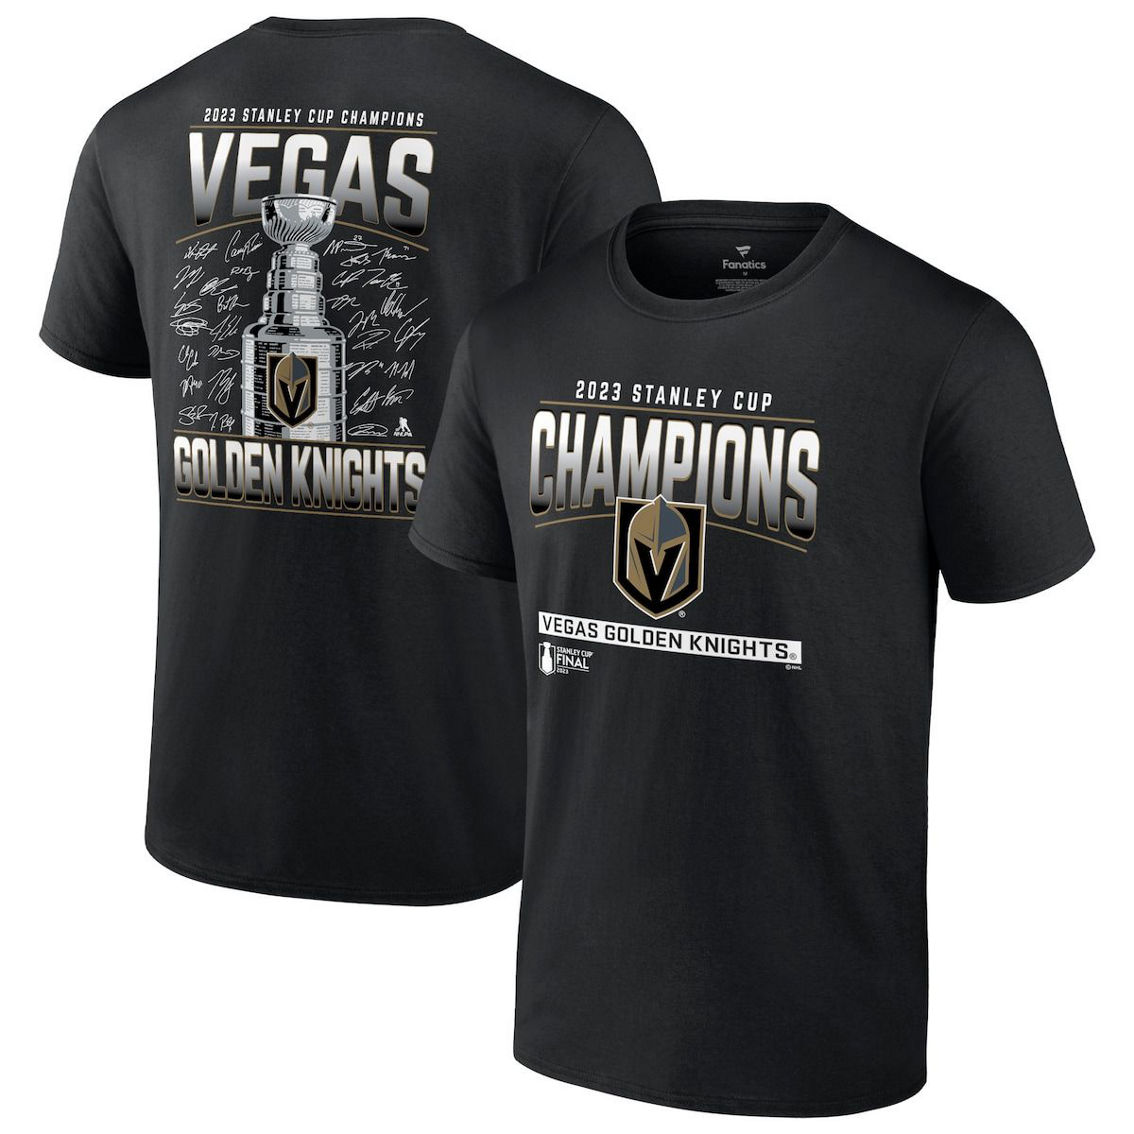 Fanatics Branded Men's Black Vegas Golden Knights 2023 Stanley Cup s Signature Roster T-Shirt - Image 2 of 4